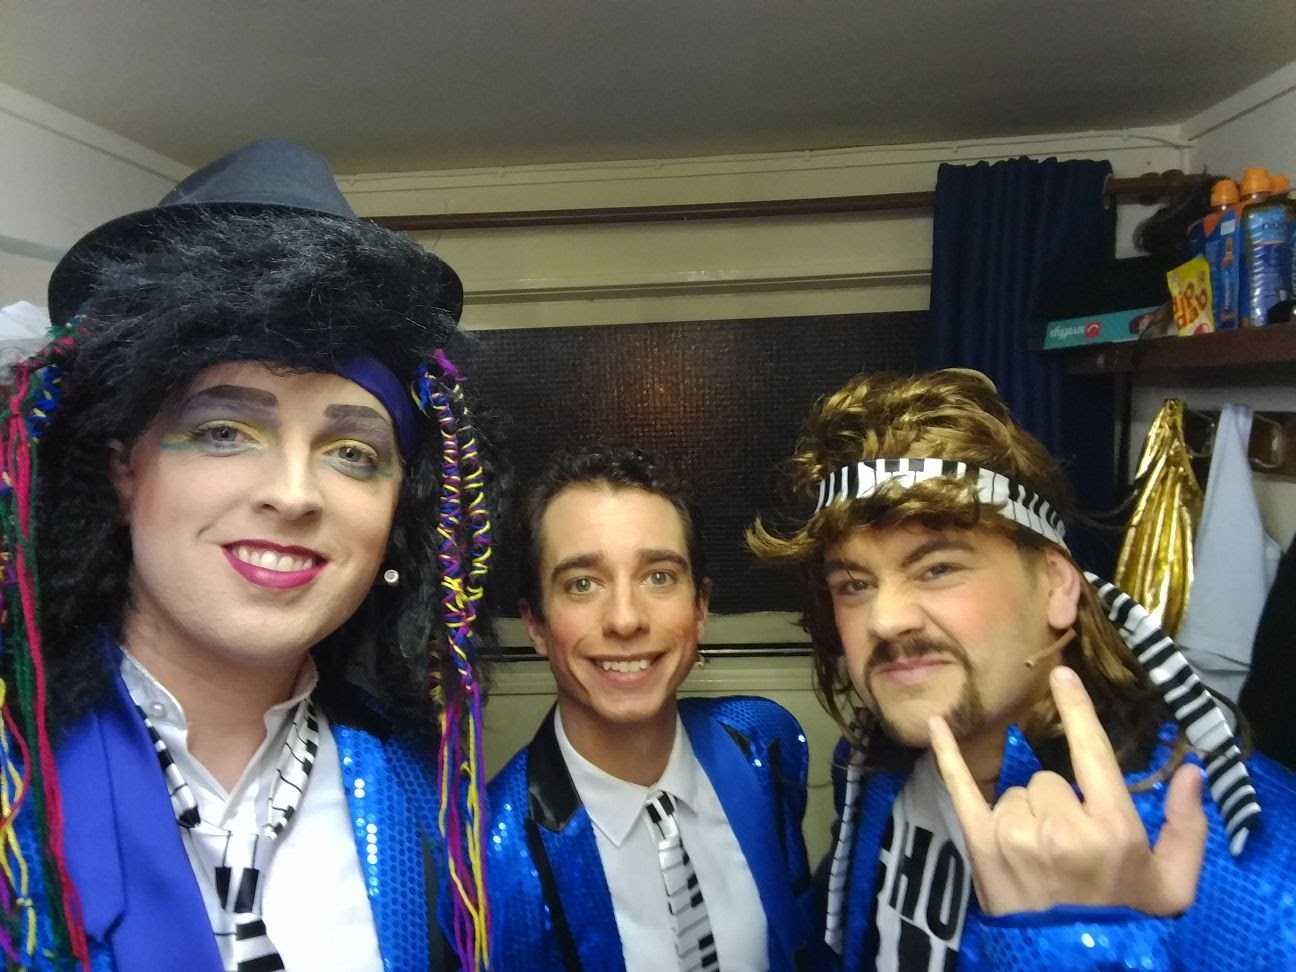 Three actors preparing for a show backstage